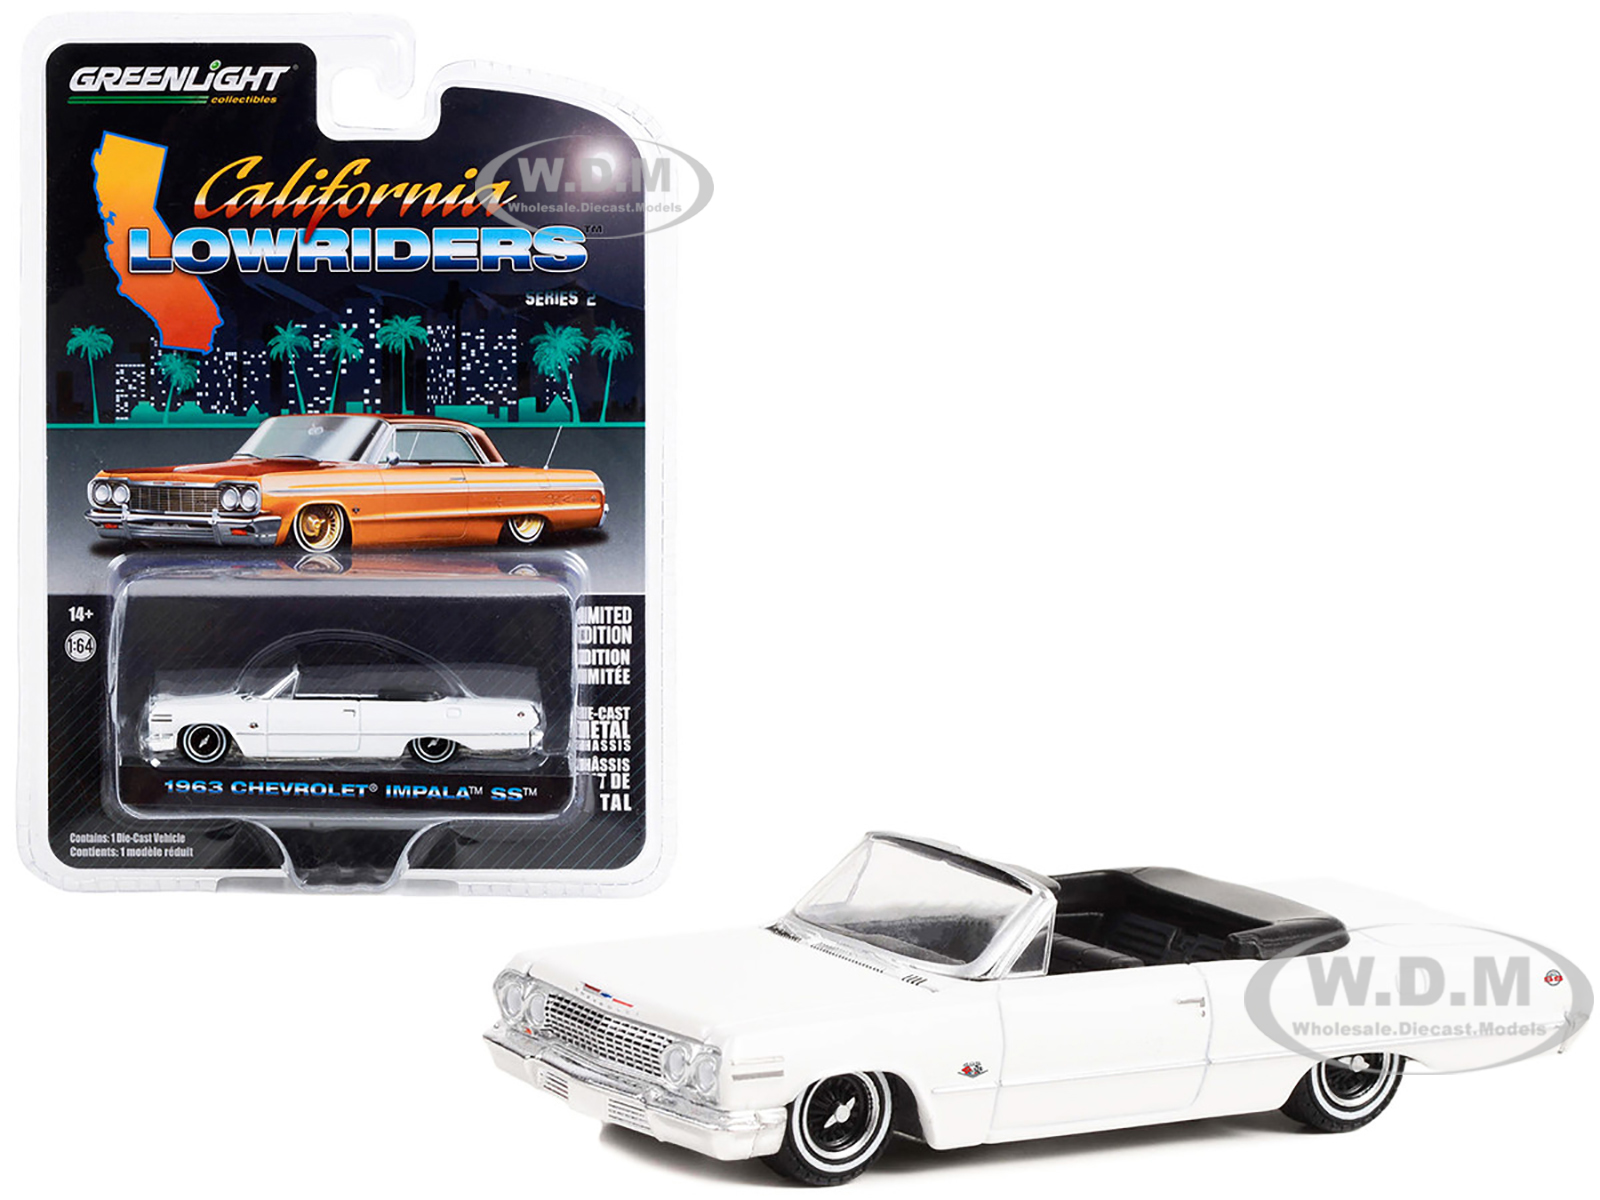 1963 Chevrolet Impala SS Convertible White California Lowriders Series 2 1/64 Diecast Model Car by Greenlight